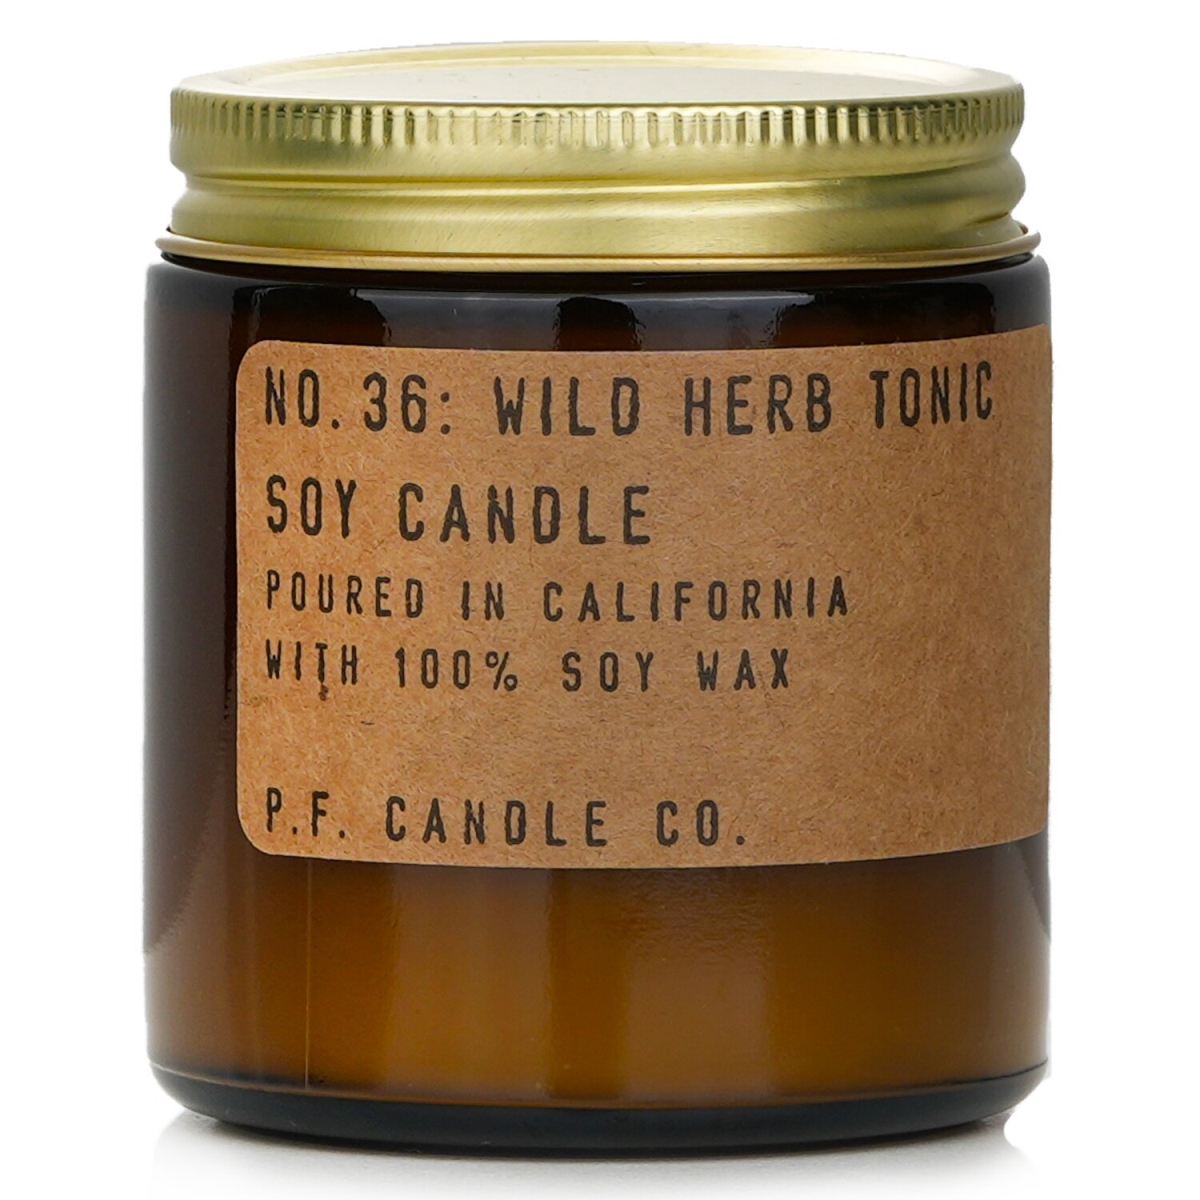 302771 3.5 oz Soy Candle, Wild Herb Tonic -  P.F. Candle